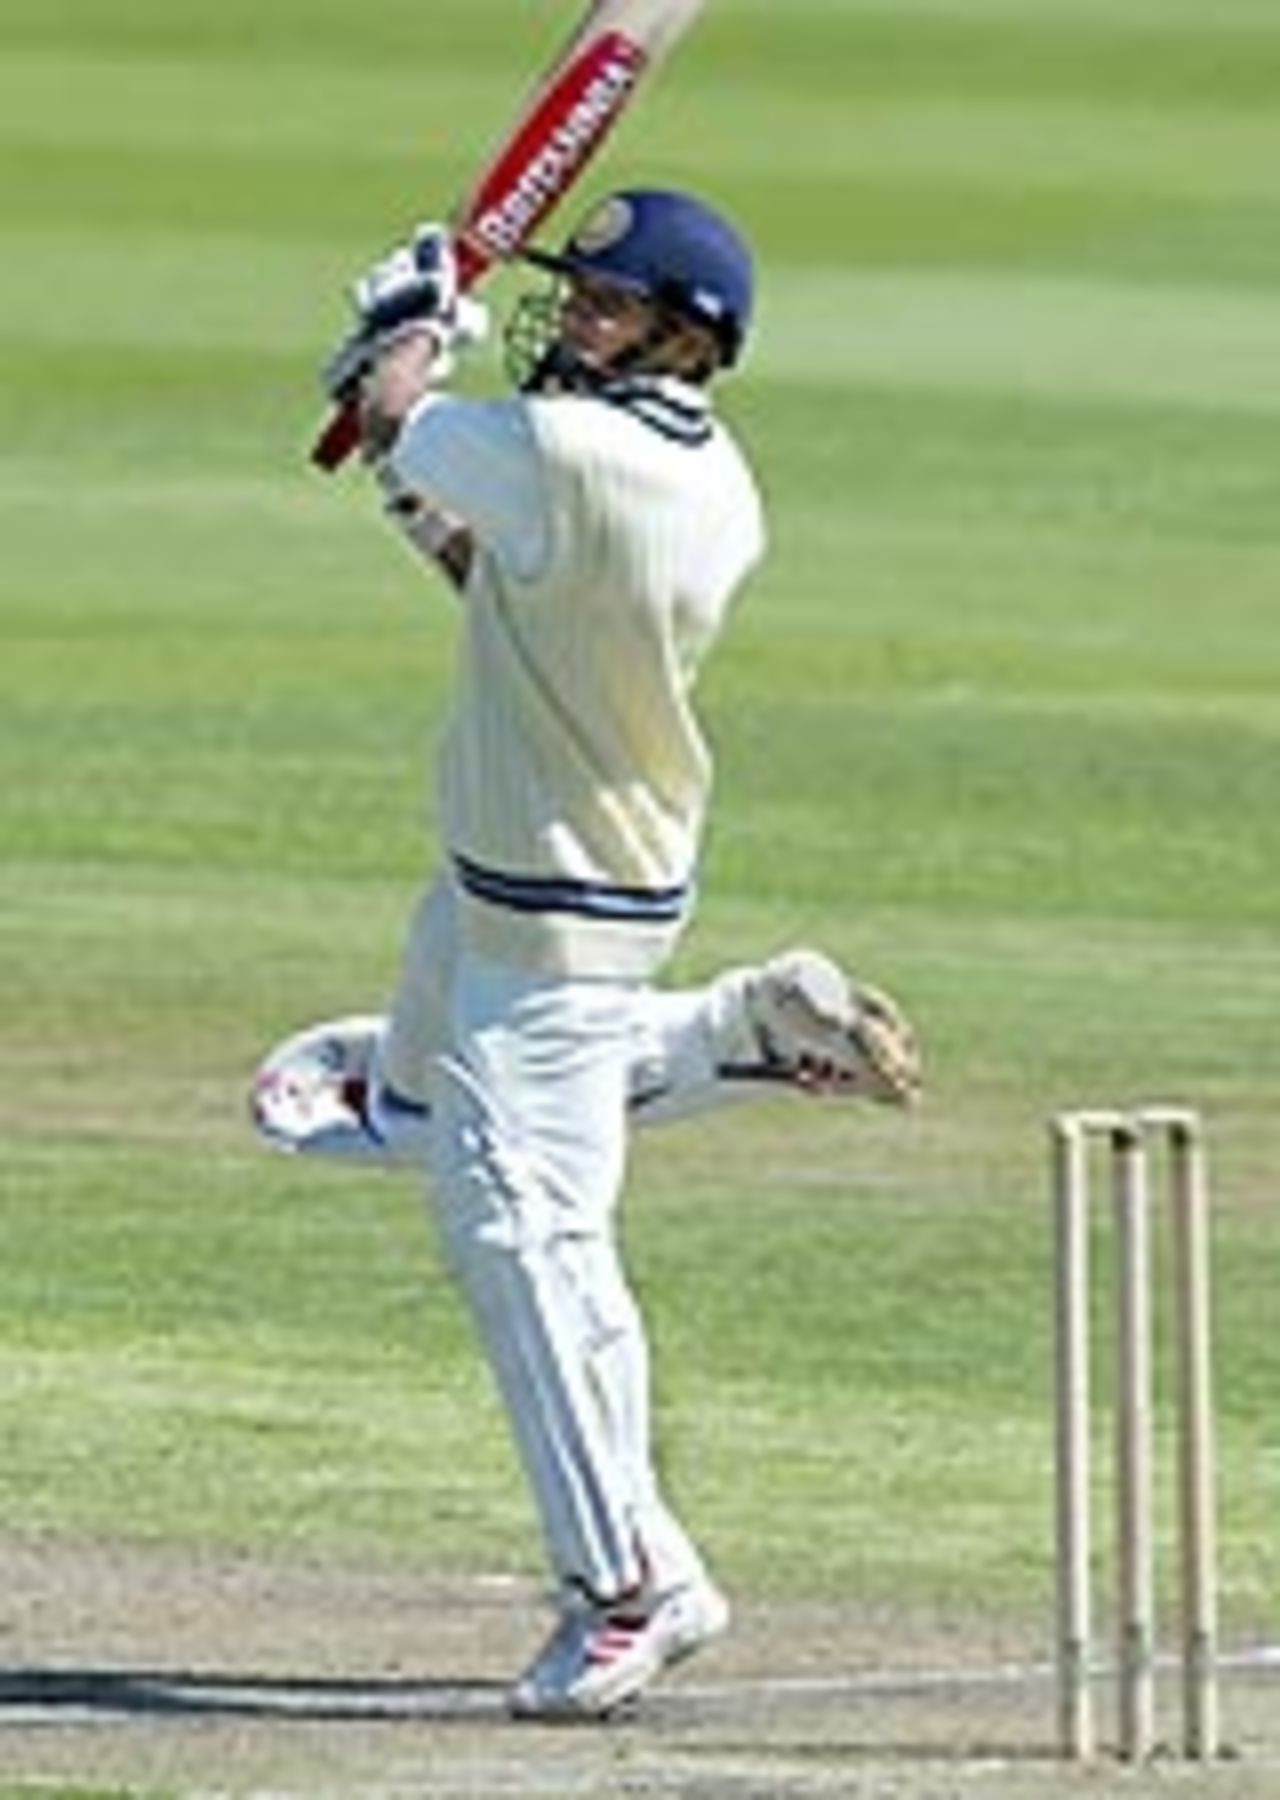 Parthiv Patel plays a flamboyant shot on one foot, Australia A v Indians, tour game, Hobart, 2nd day, December 20, 2003